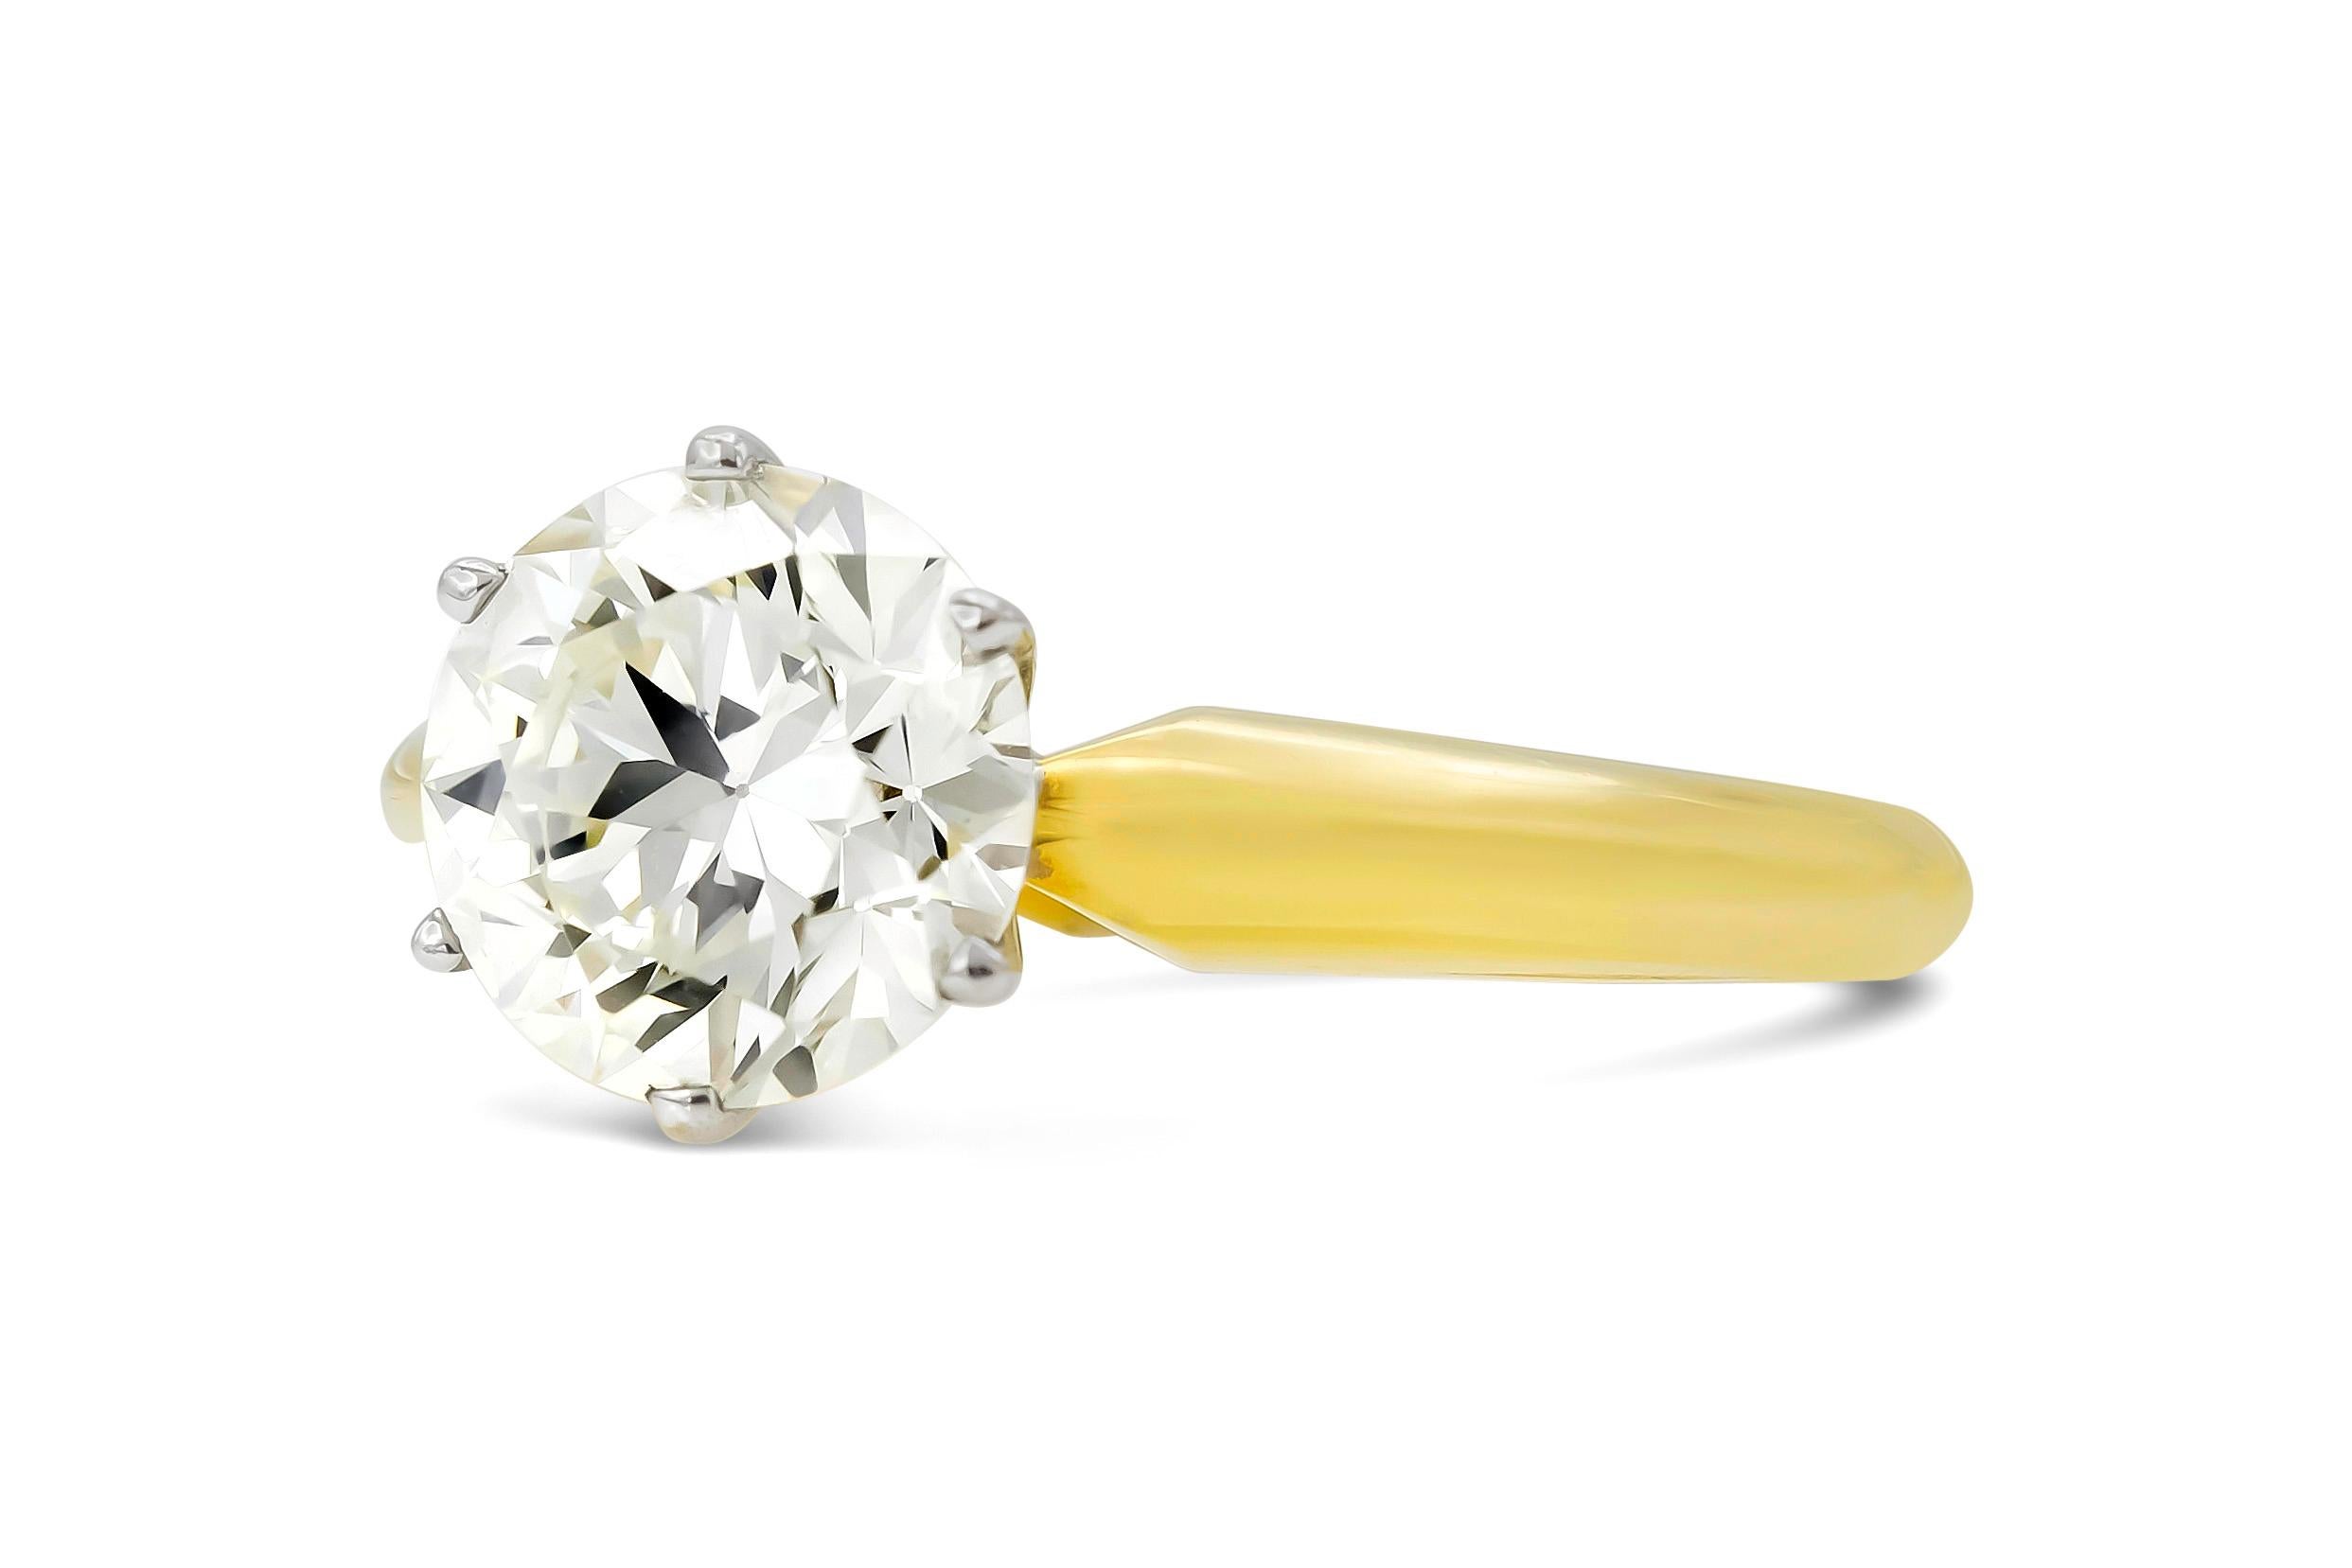 Finely crafted in 18k yellow and white gold with an Old European cut diamond weighing 1.77 carats.
K color, VS1 clarity
Size 6, resizable